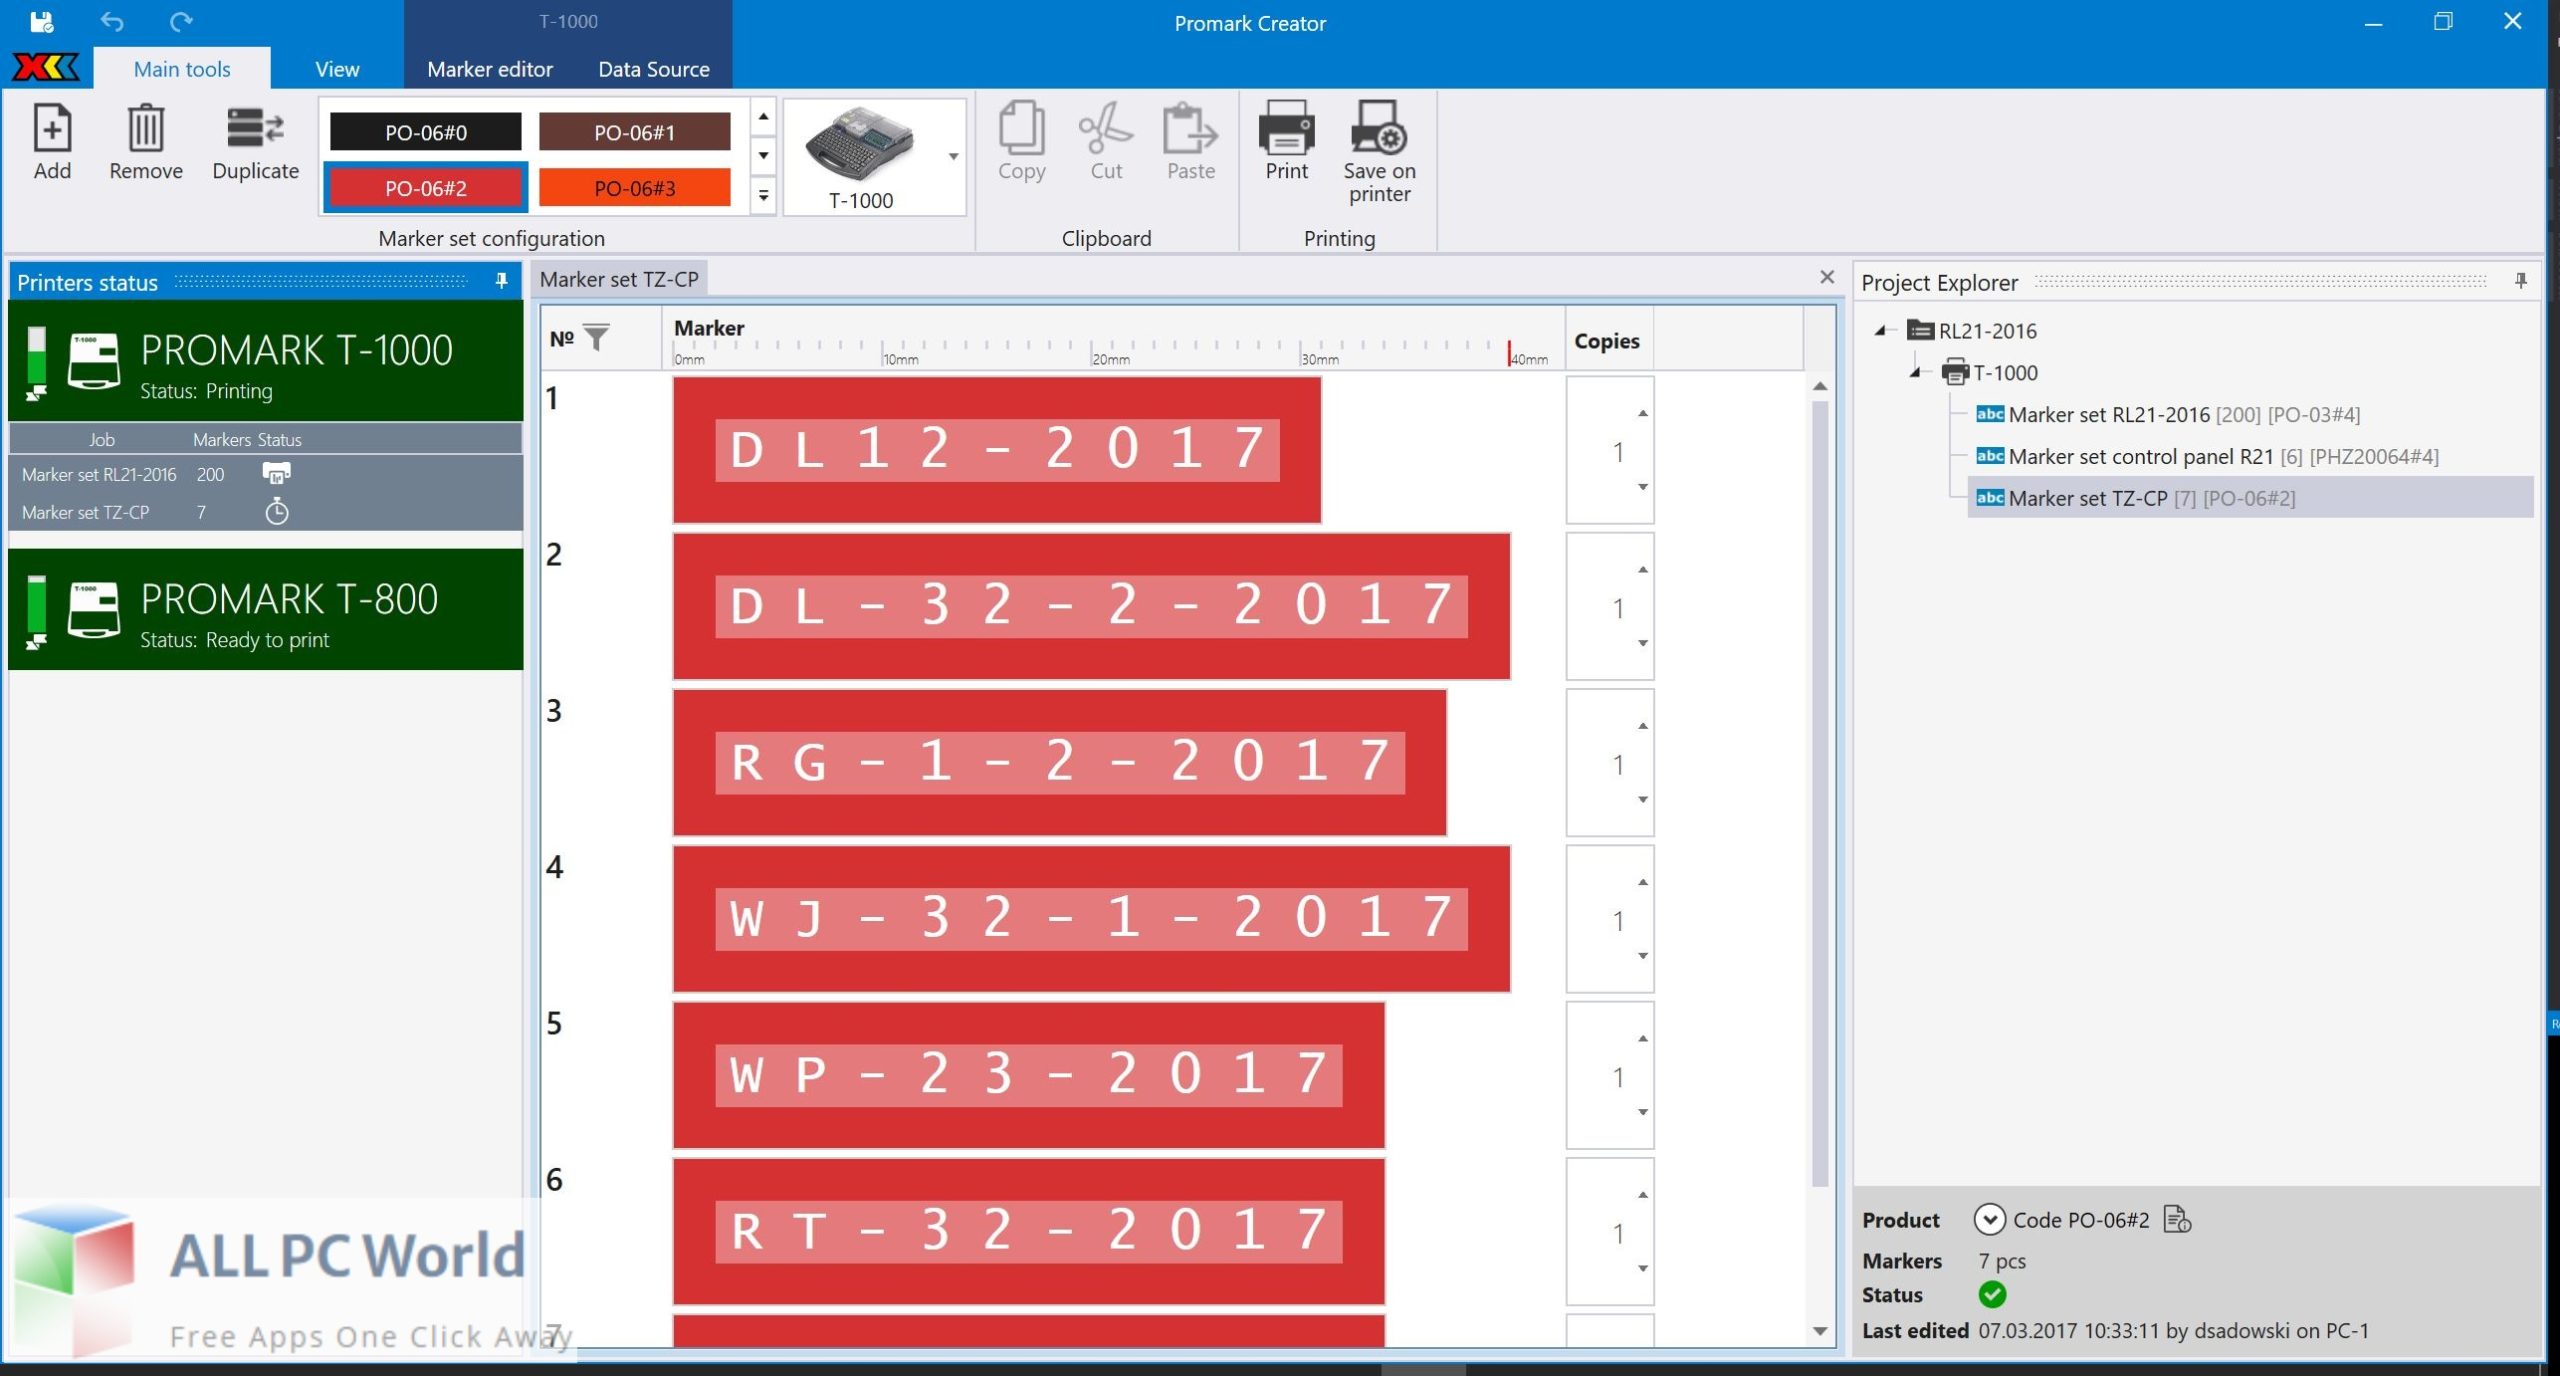 Promark Creator for Free Download